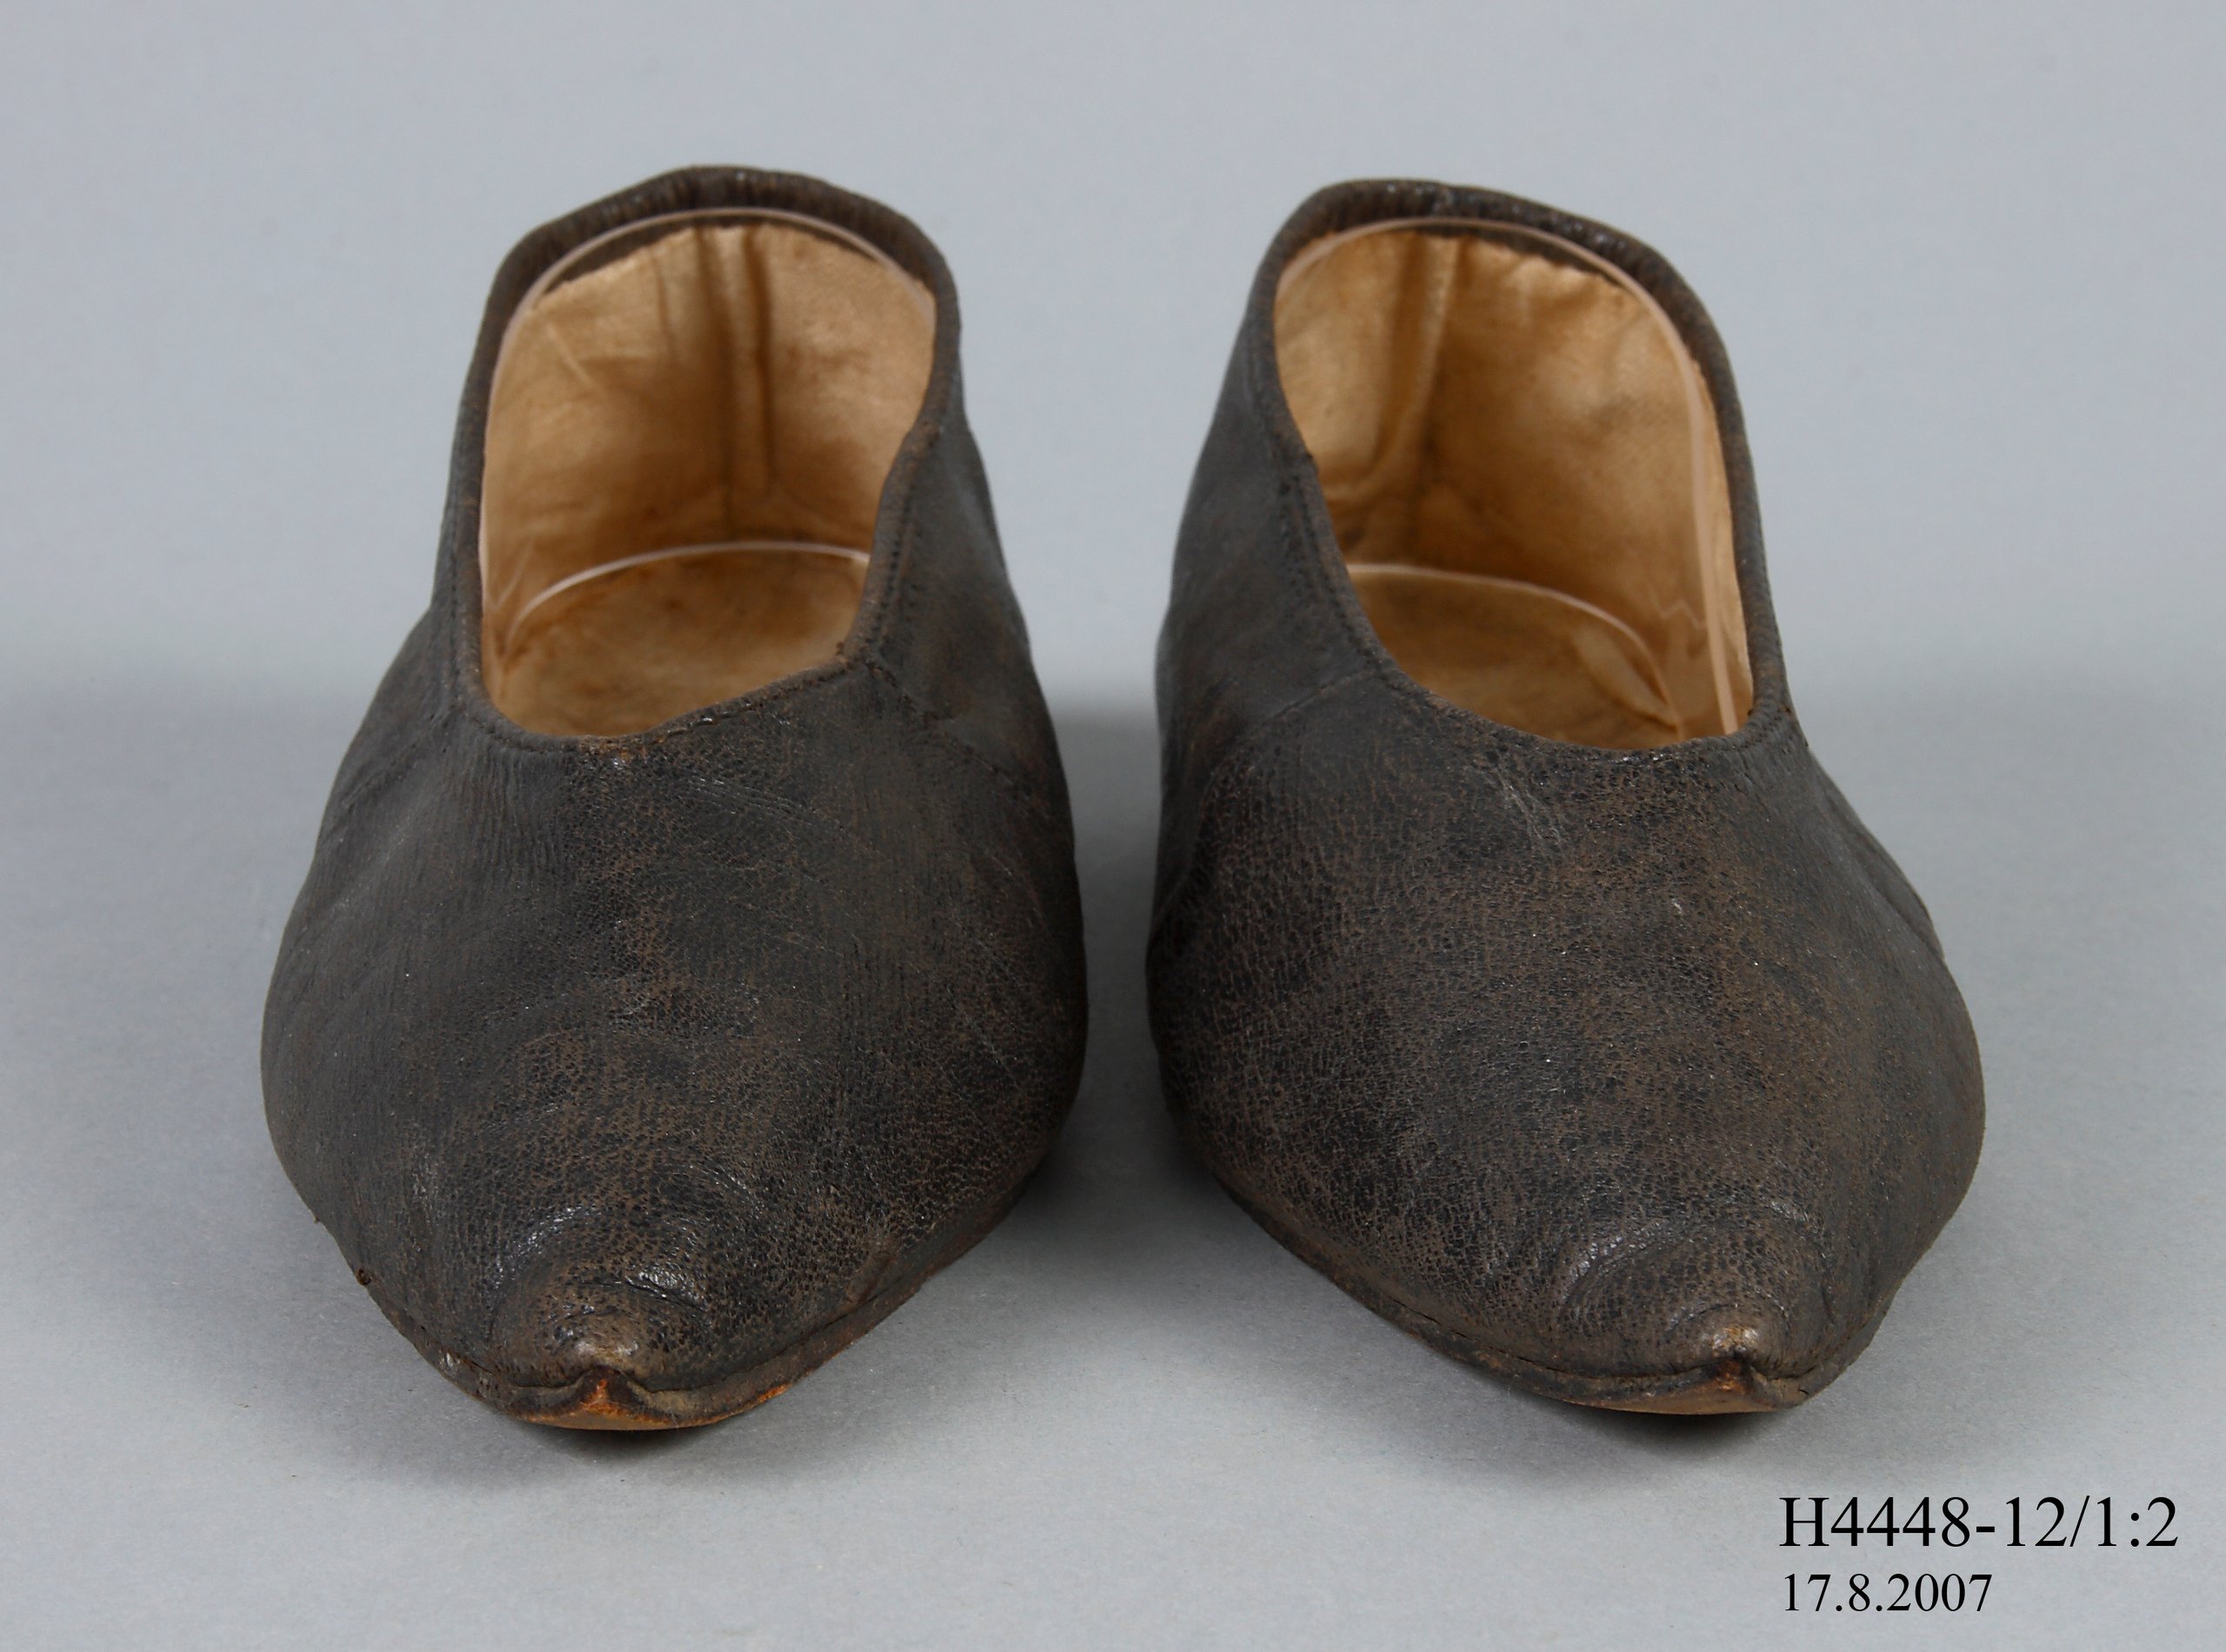 Pair of slip on shoes from the Joseph Box collection